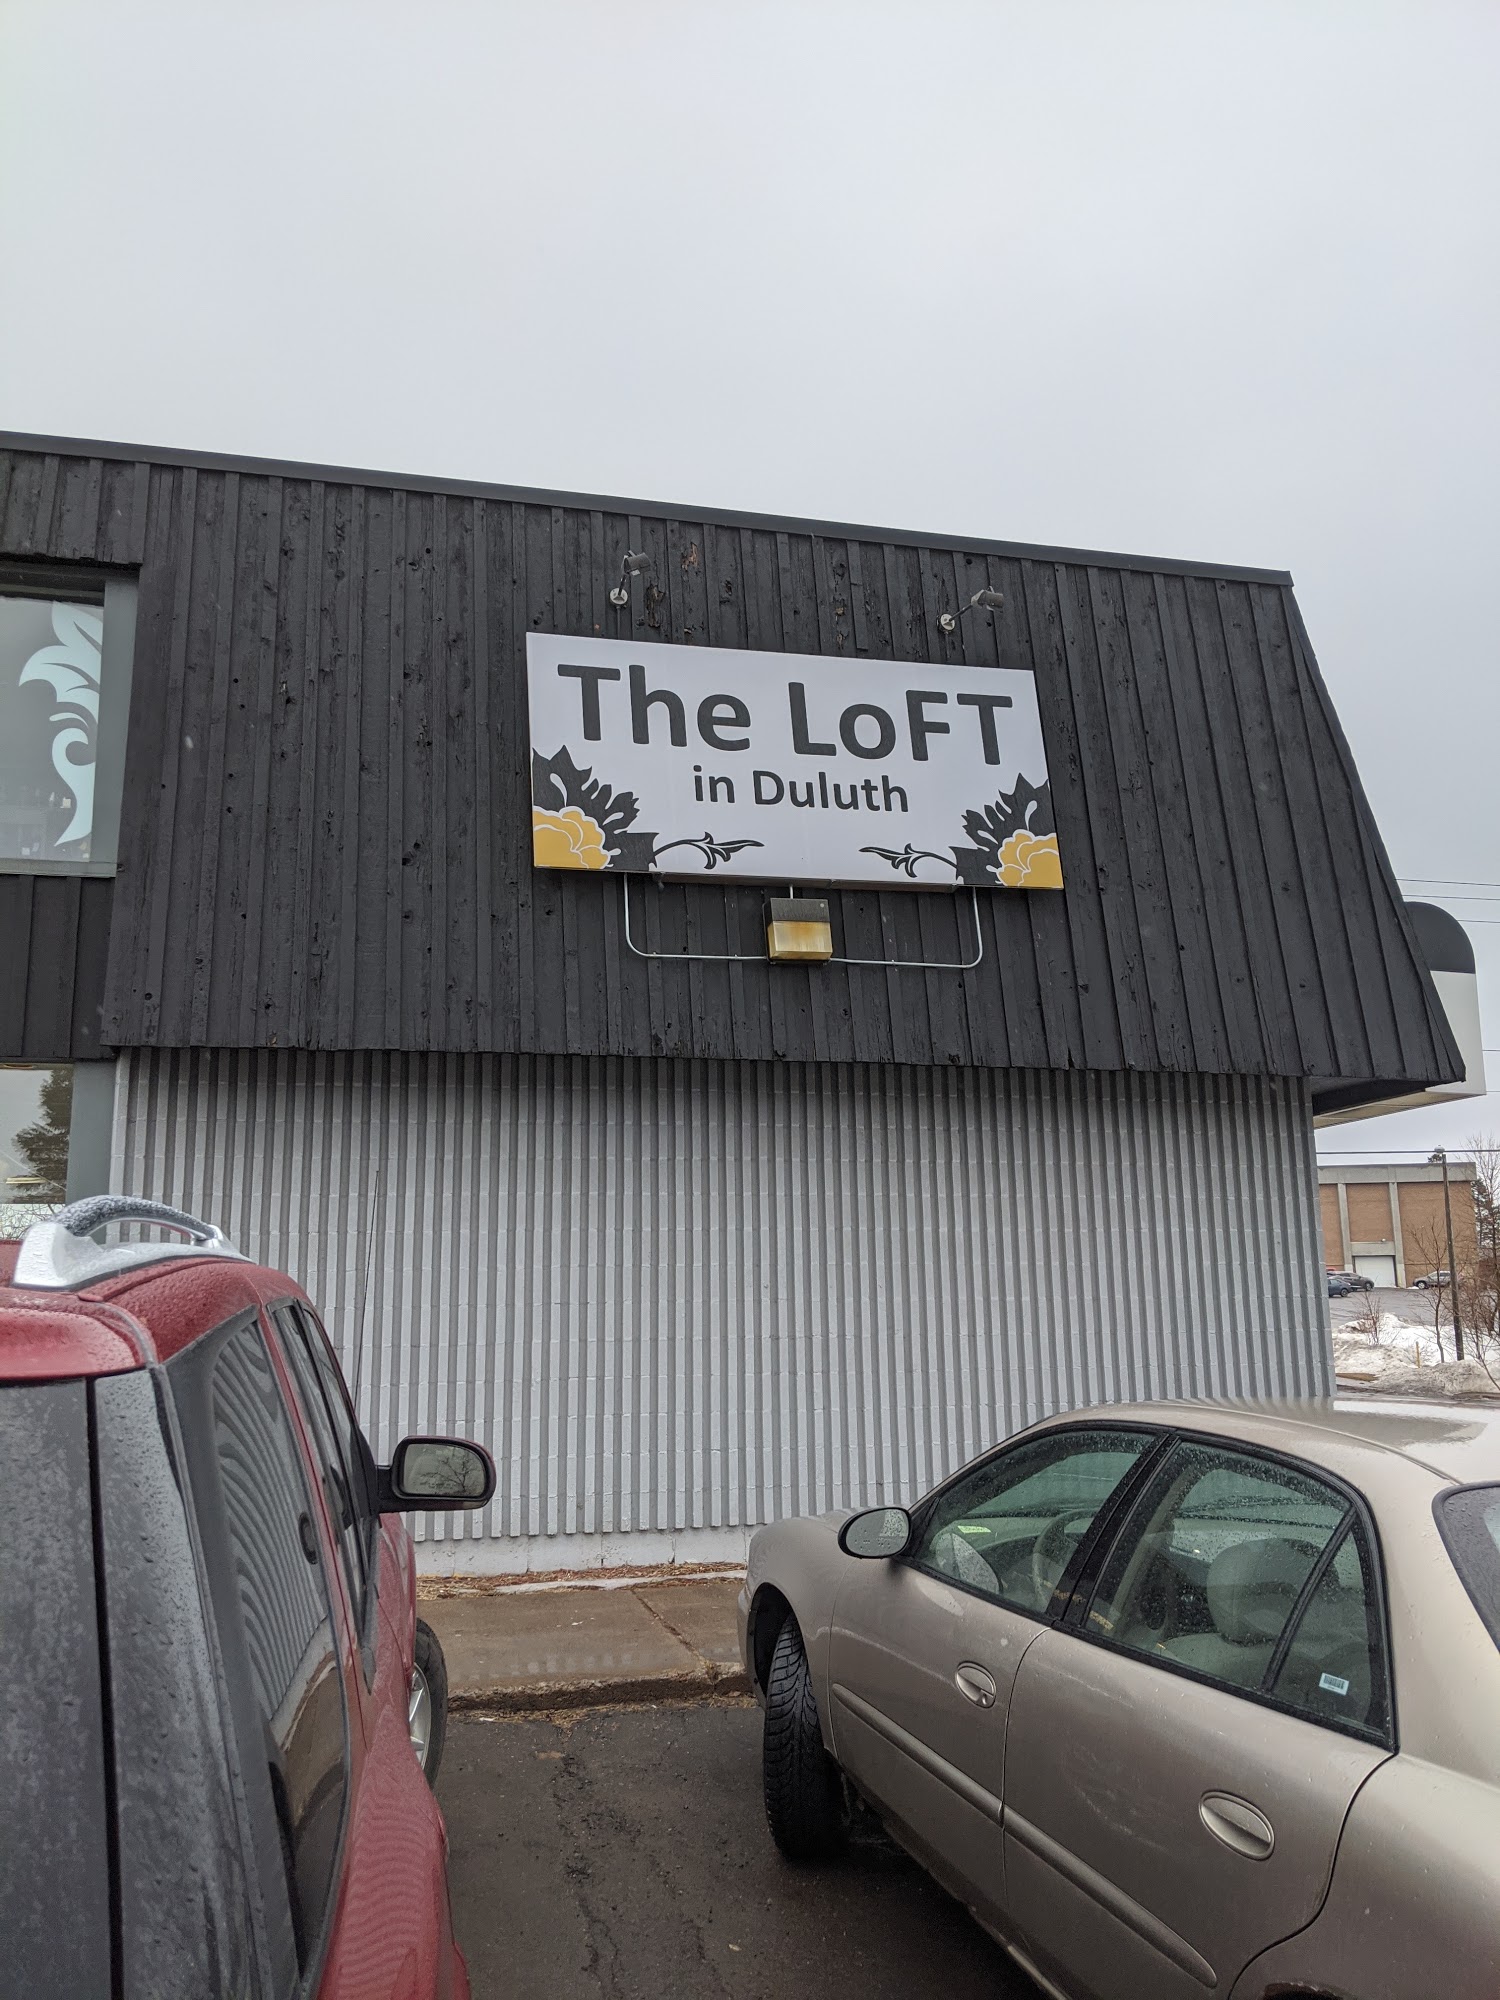 The LoFT in Duluth